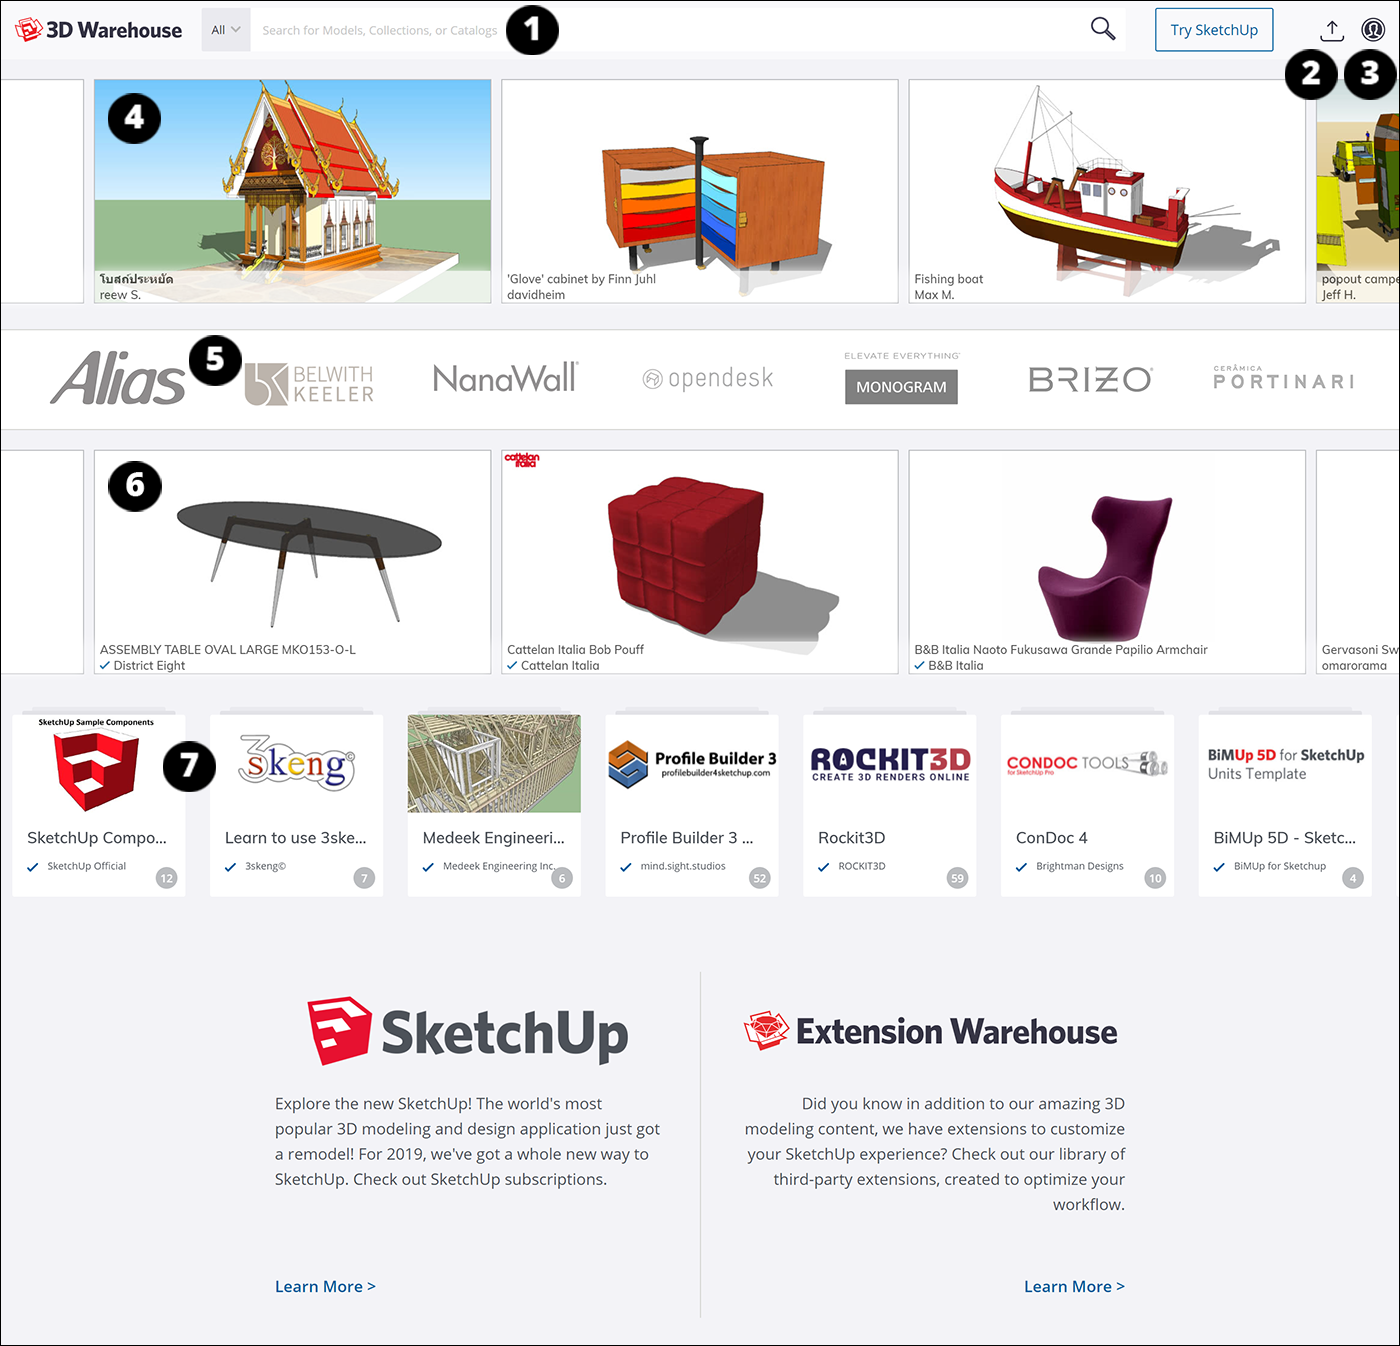 how to use 3d warehouse in sketchup